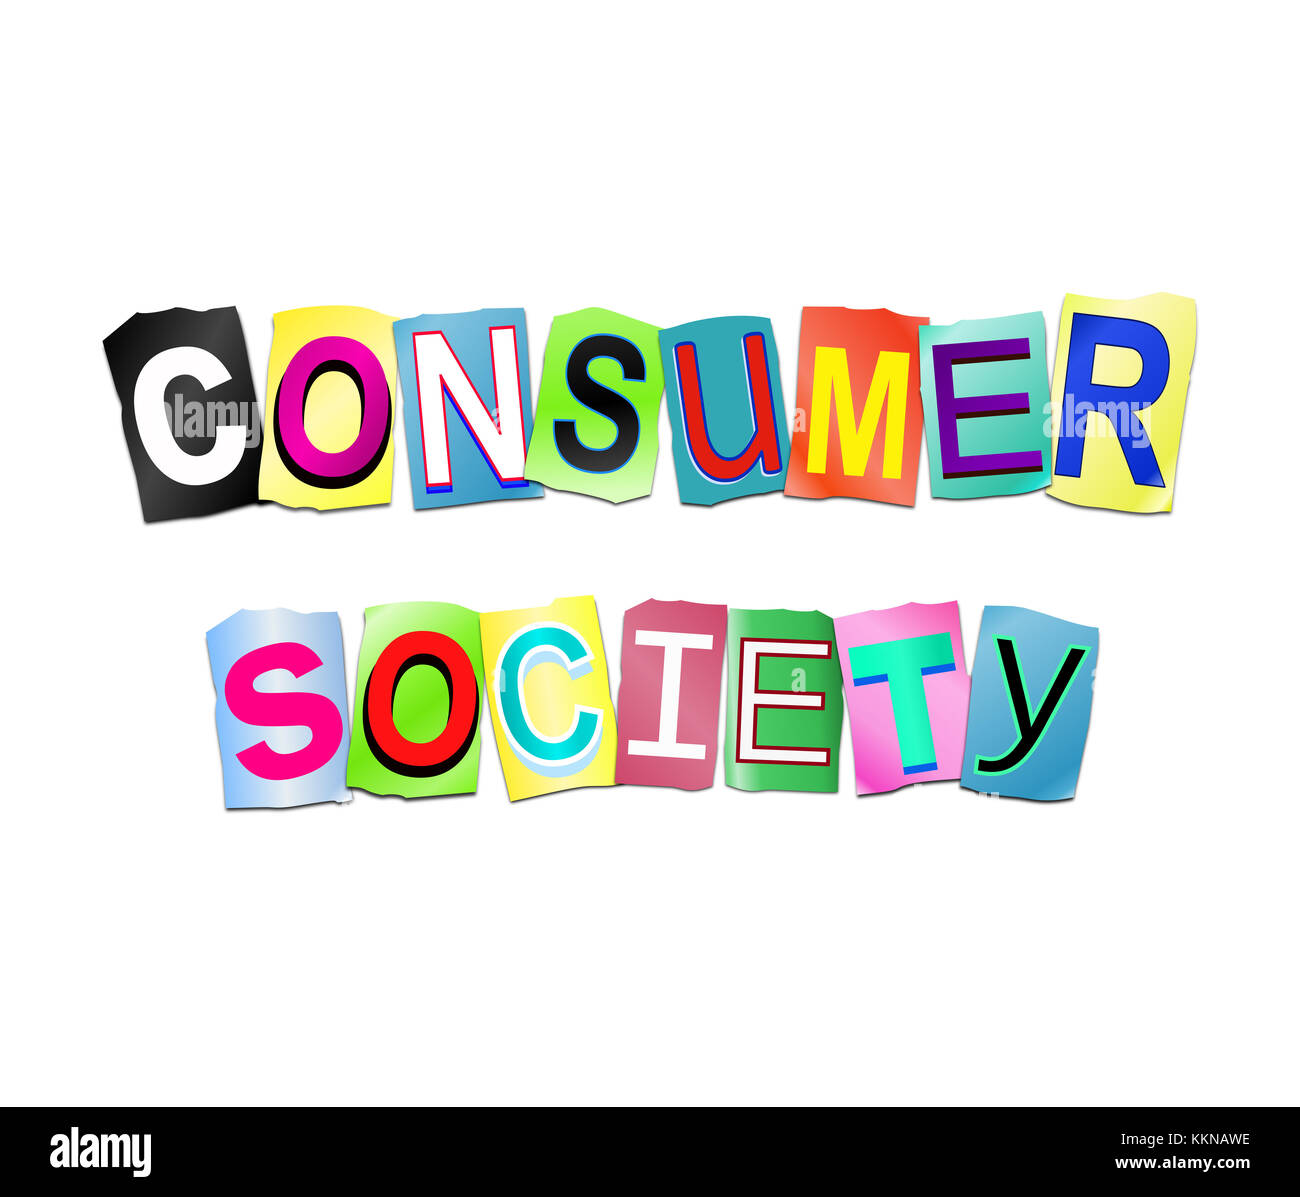 3d Illustration depicting a set of cut out printed letters arranged to form the words consumer society. Stock Photo